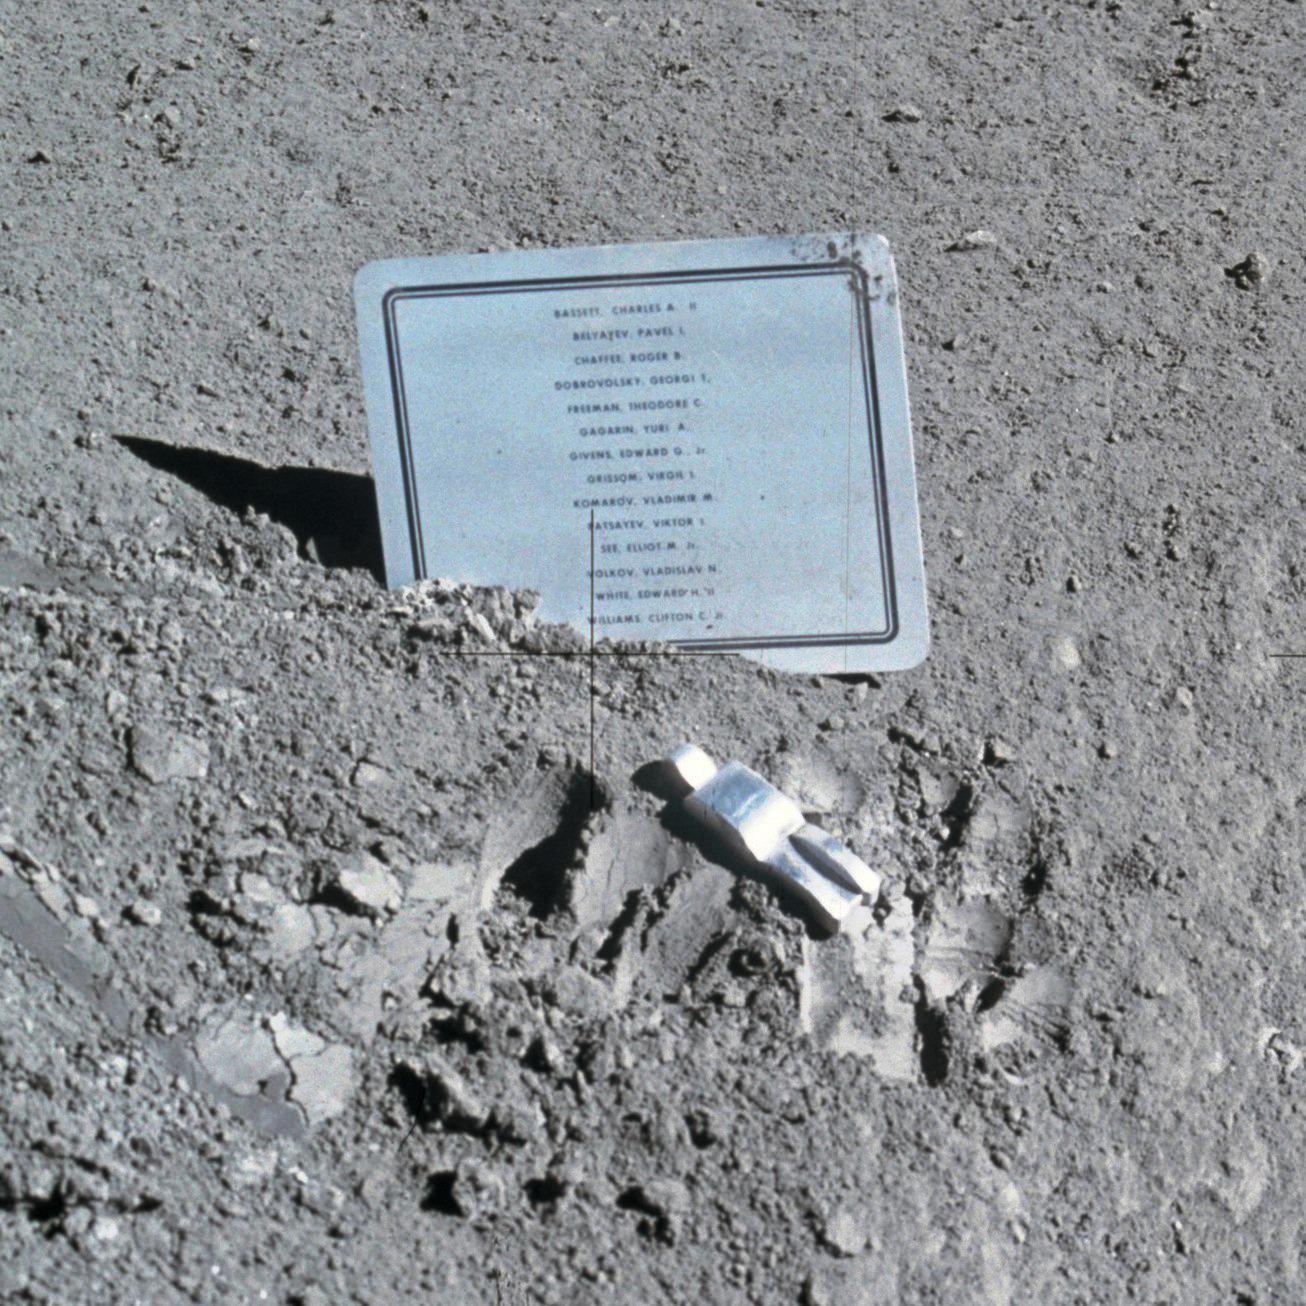 There's a memorial sitting on the Moon for every astronaut who died in the pursuit of space exploration, including Russian Cosmonauts, allegedly.